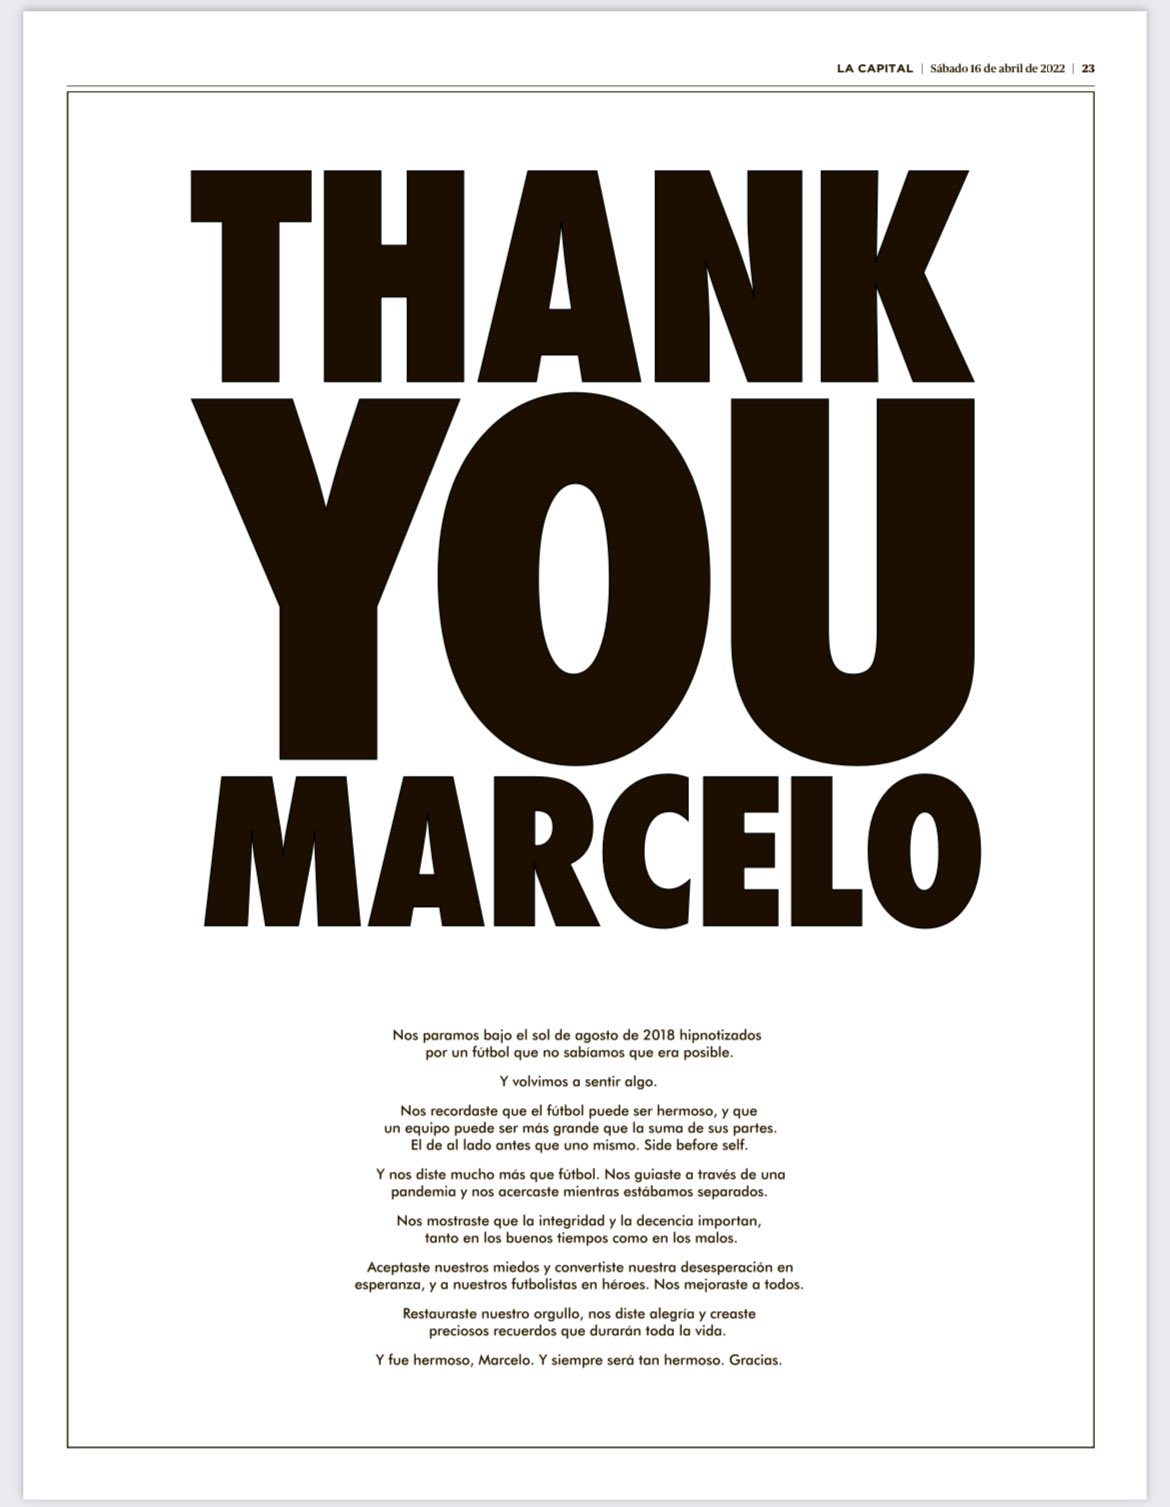 Leeds fans pay tribute to Marcelo Bielsa with full-page ad in Argentinian newspaper La Capital